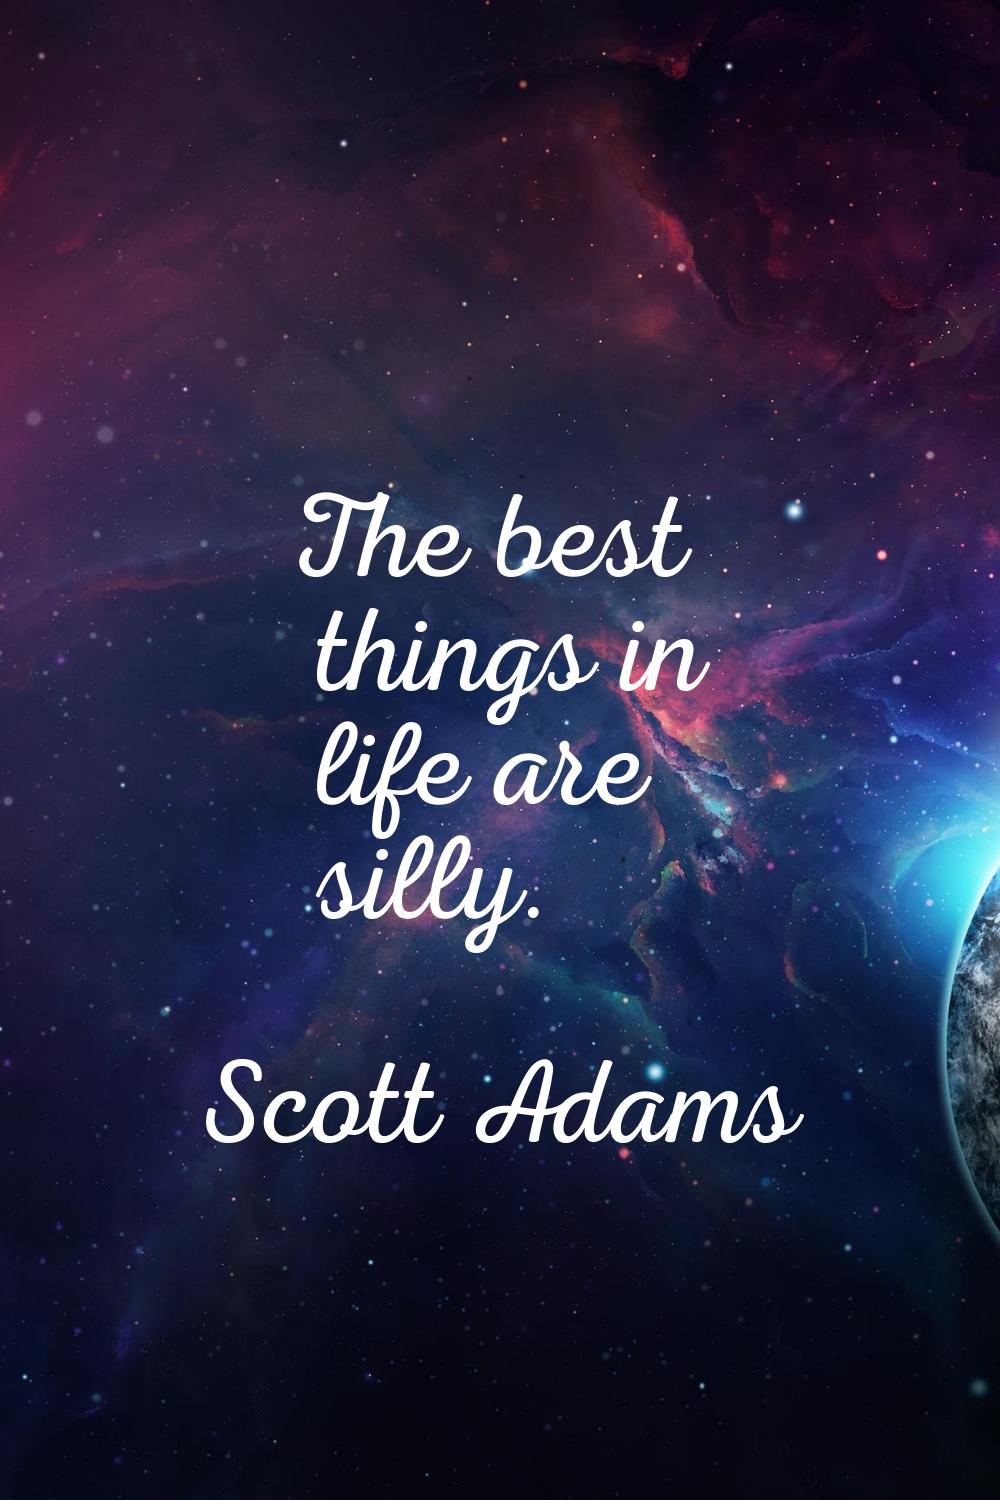 The best things in life are silly.